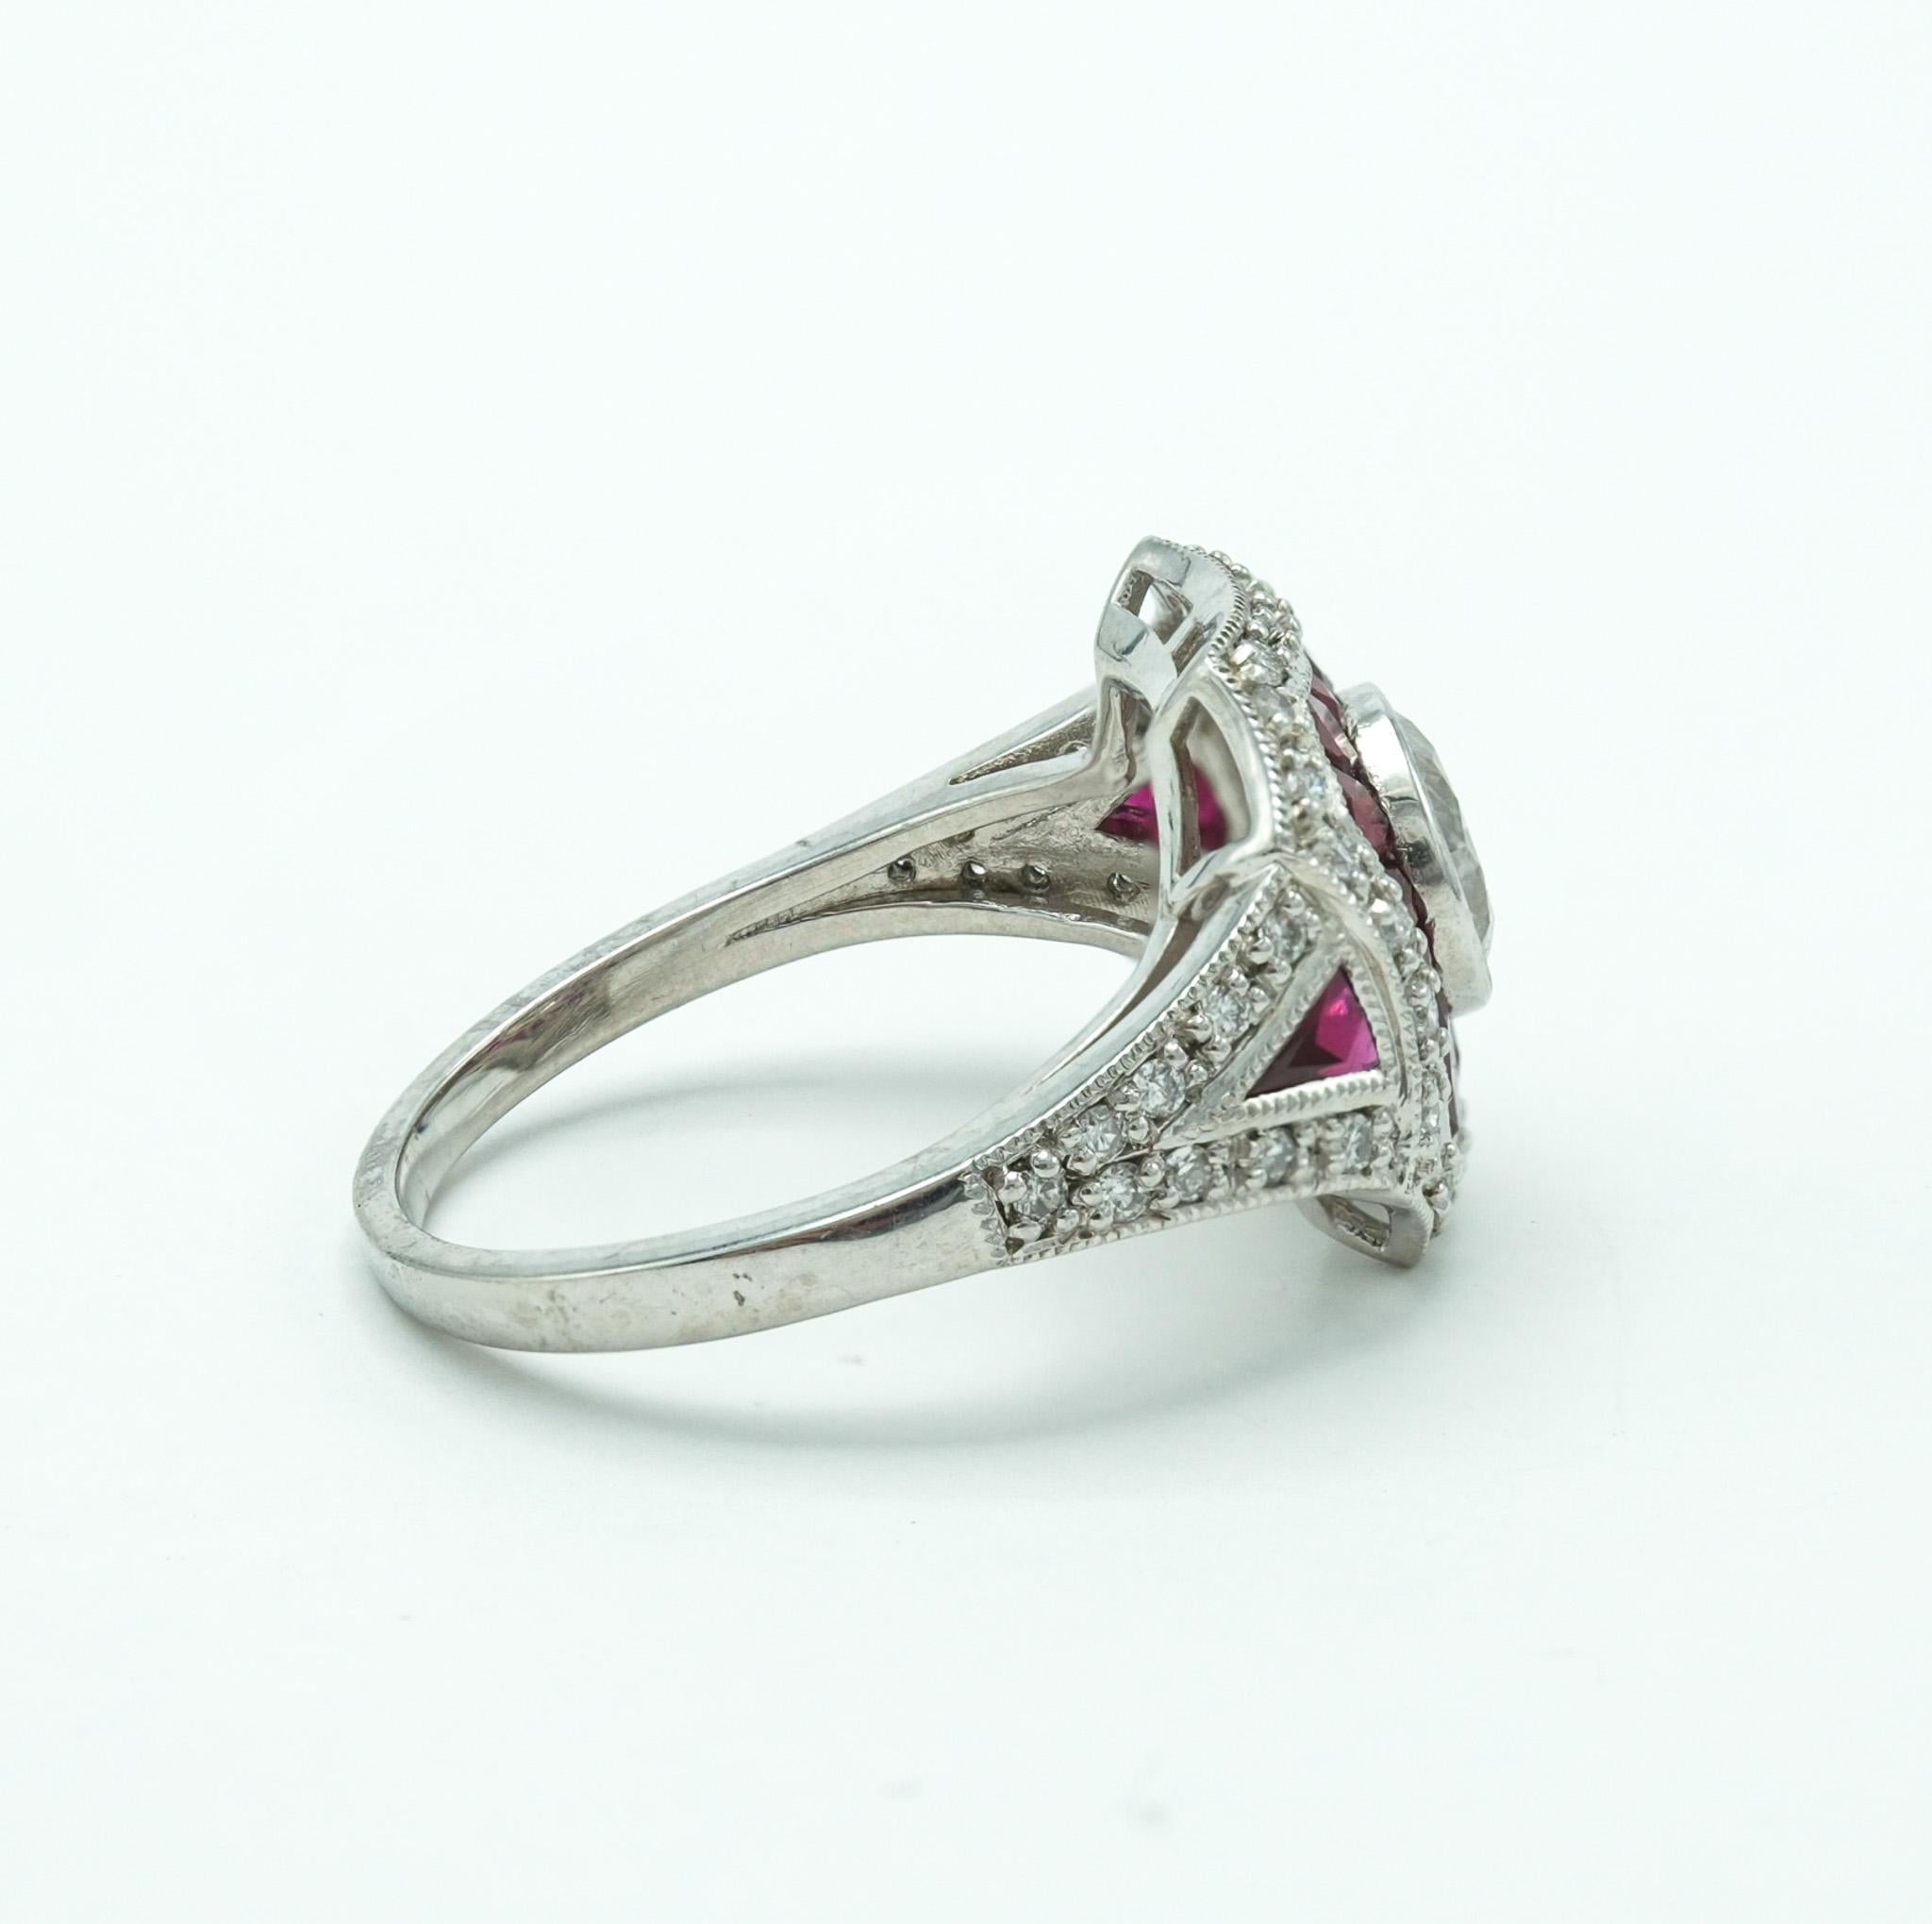 Platinum Ruby and Diamond Ring with Baguette Cut Rubies and Round Diamonds In Good Condition For Sale In Fairfield, CT